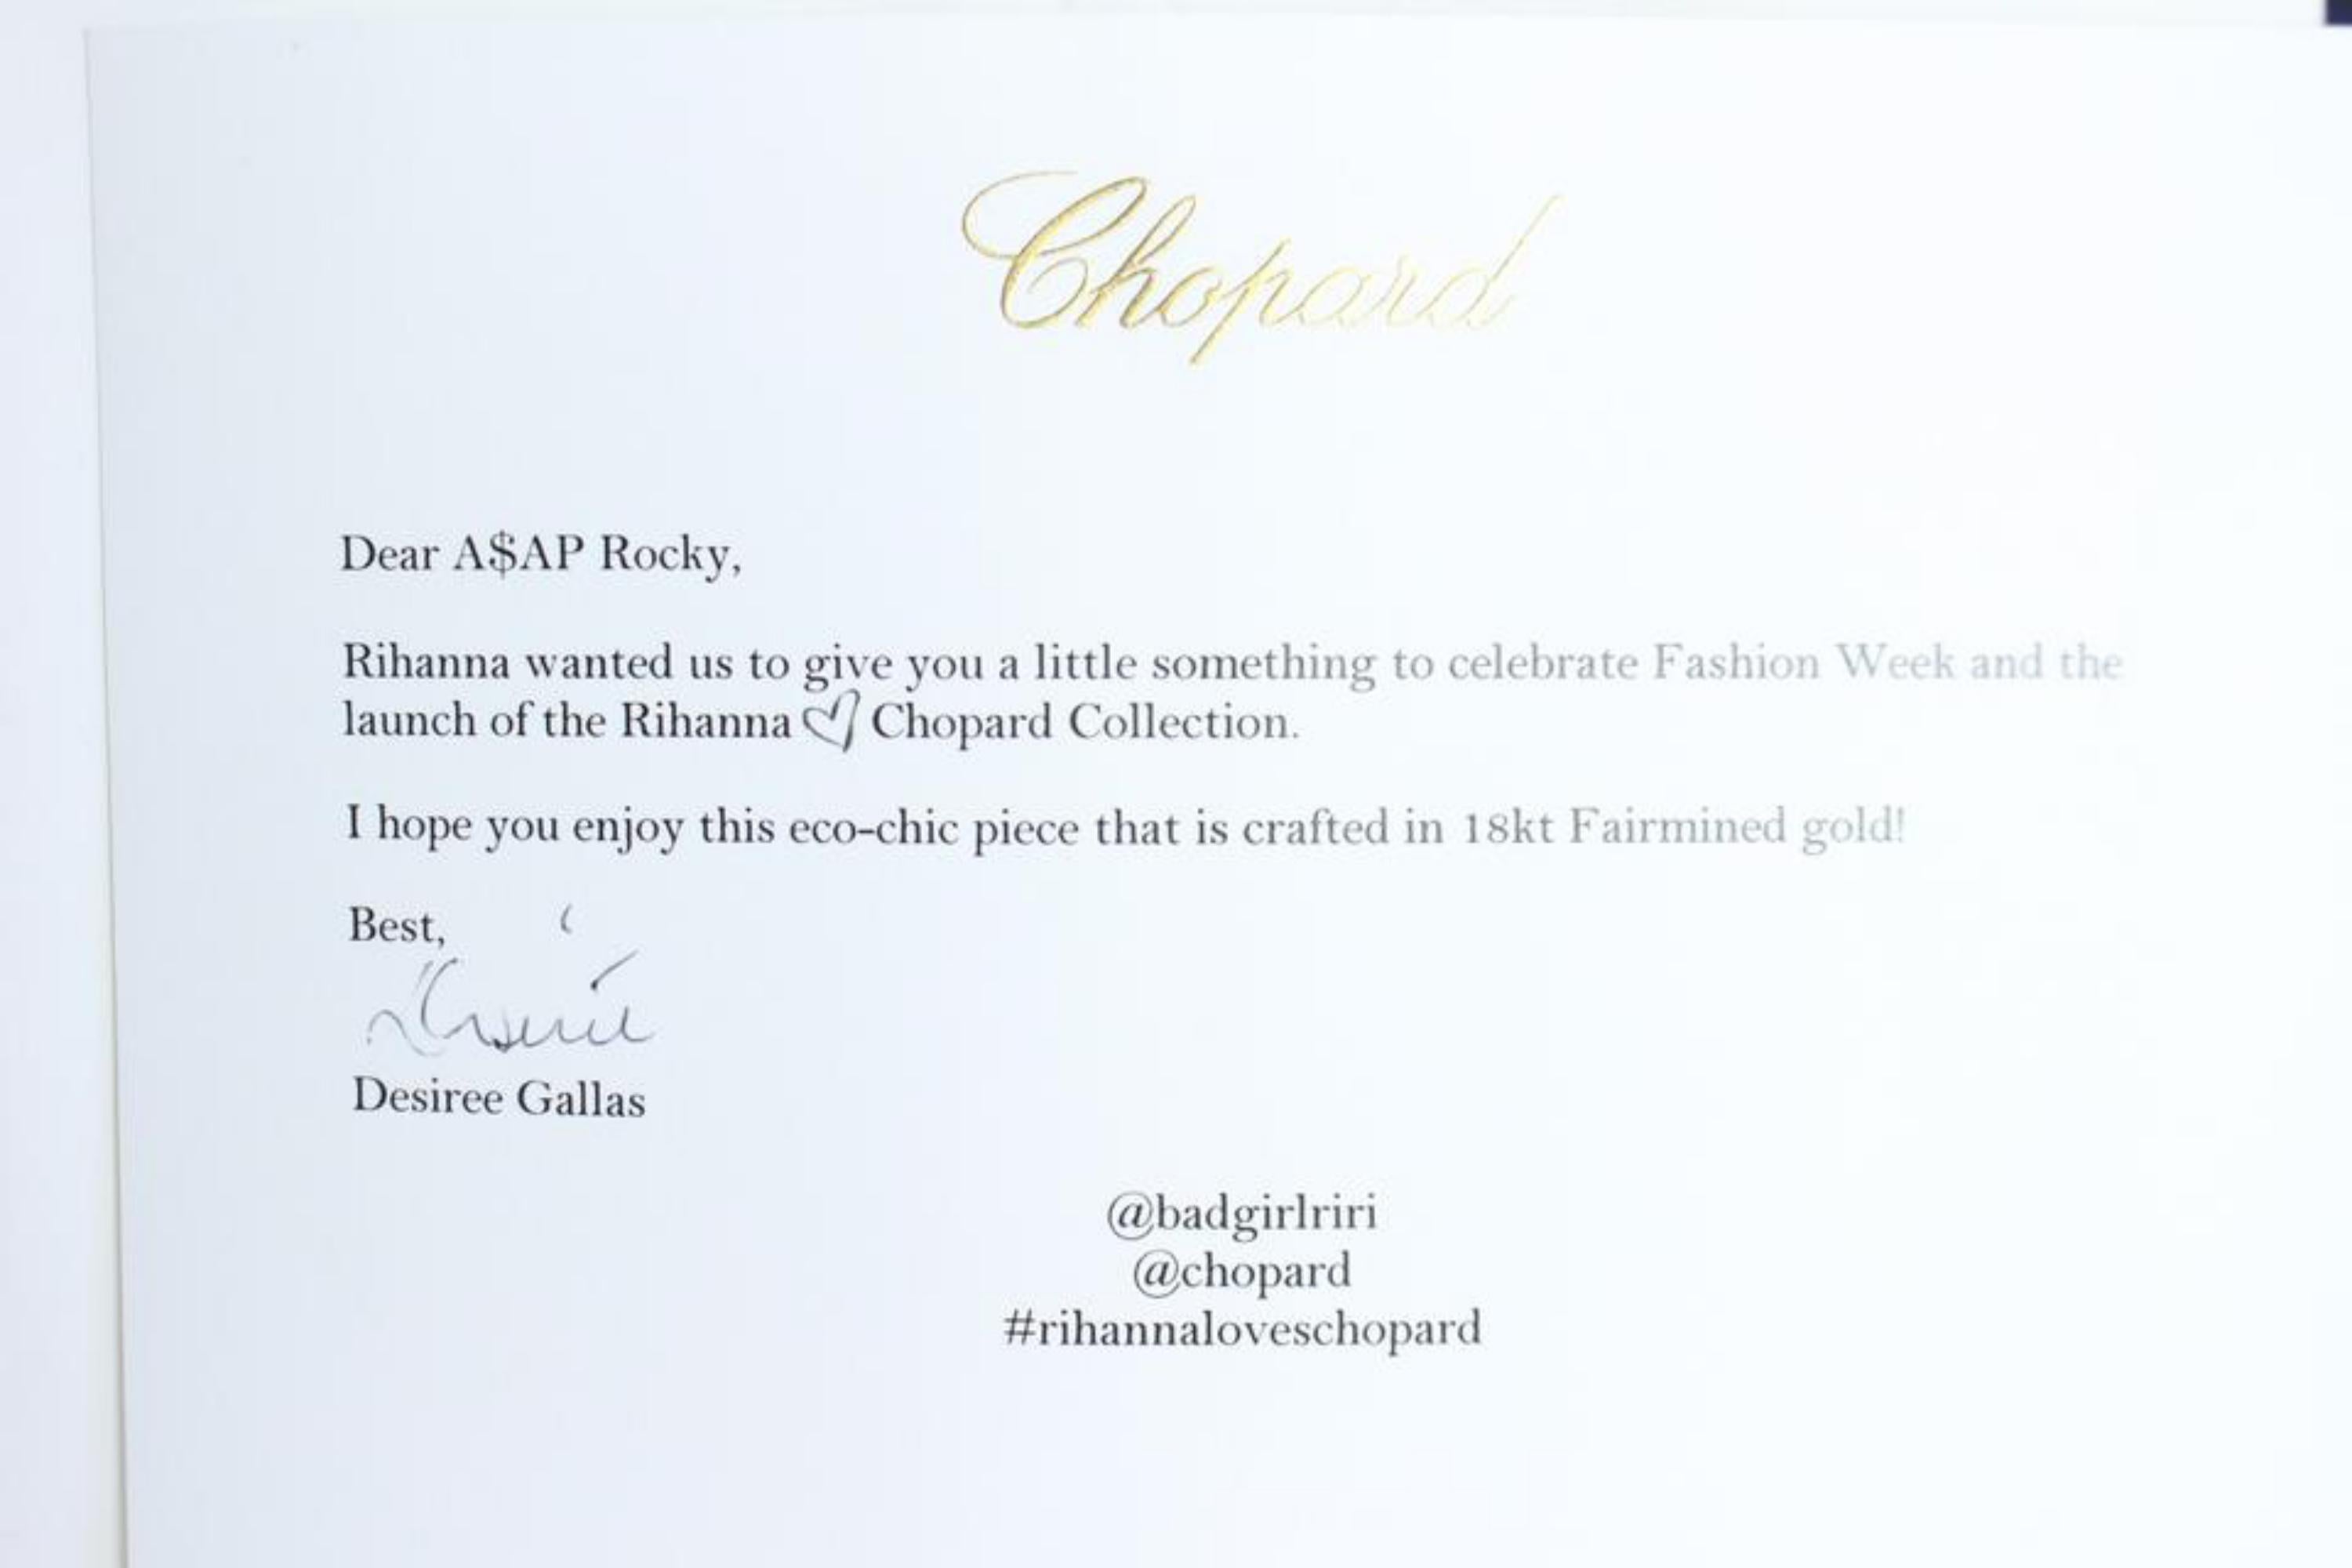 Chopard Gold (Asap Rocky) Rihanna 18k Diamond Ice Cube 6mz0828 Necklace In New Condition For Sale In Forest Hills, NY